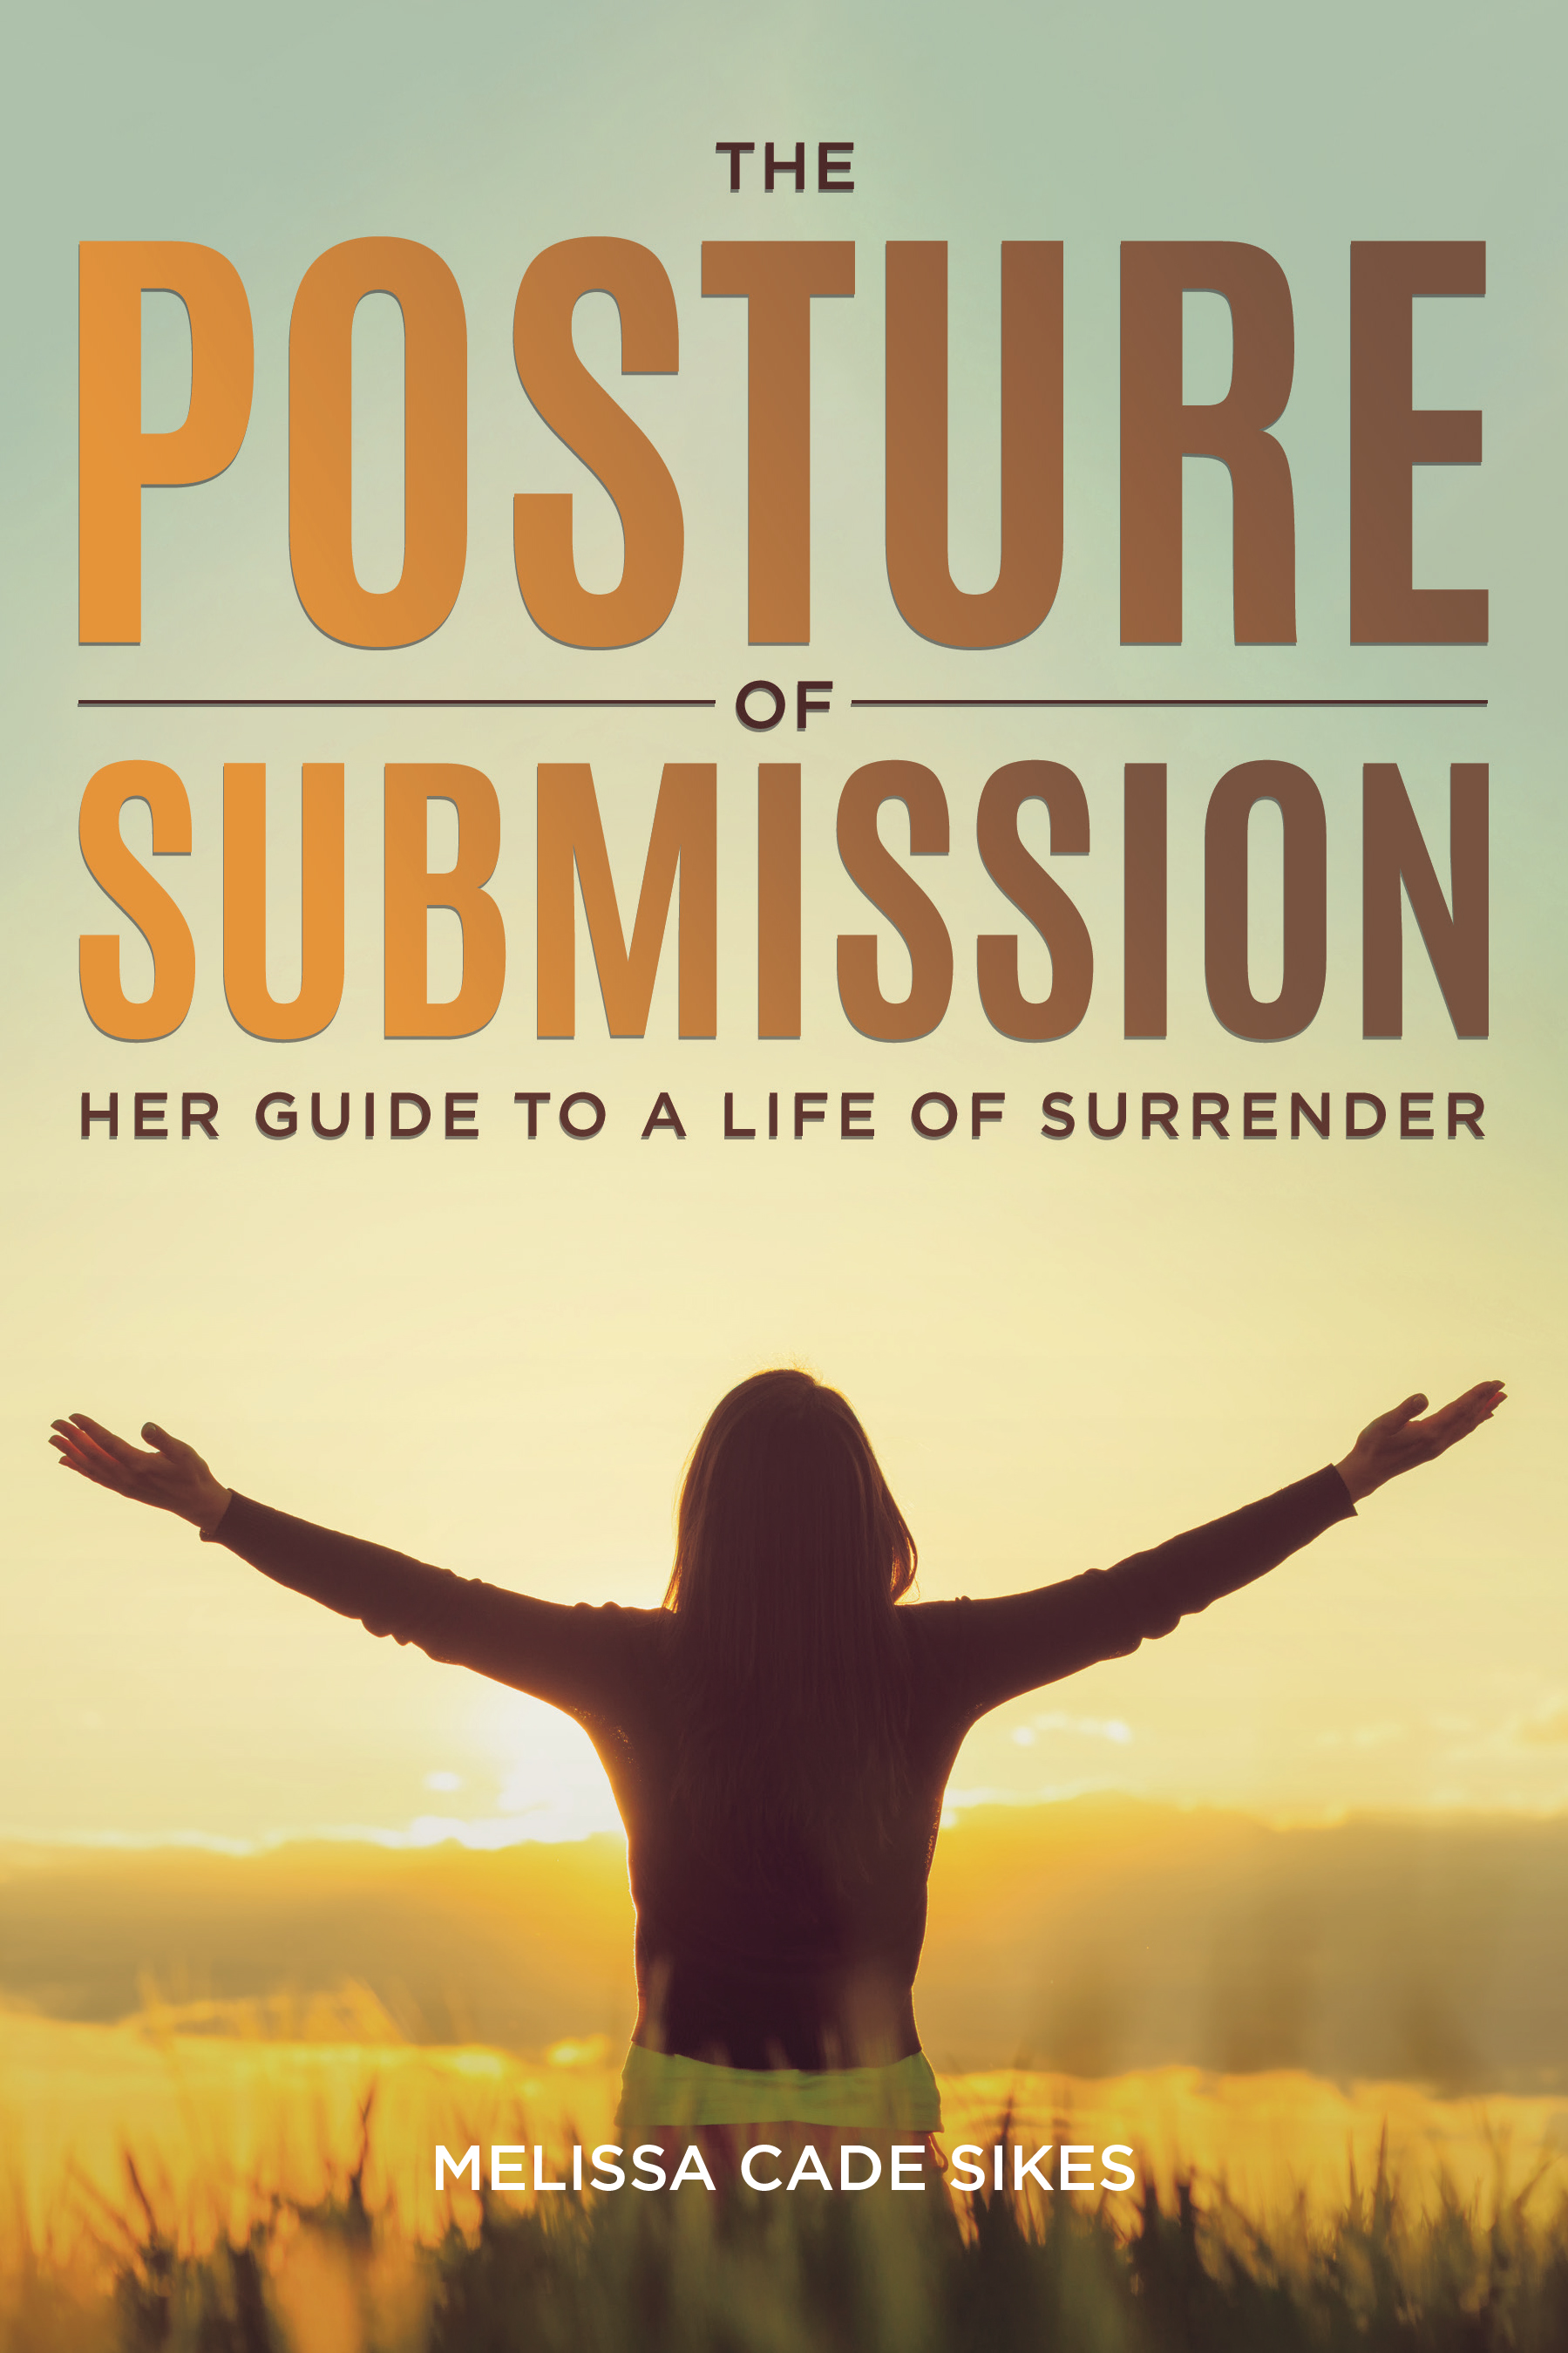 Melissa Cade Sikes’s Newly Released "The Posture of Submission: Her Guide to a Life of Surrender" is an Empowering Resource for Anyone Seeking to Trust Fully in God